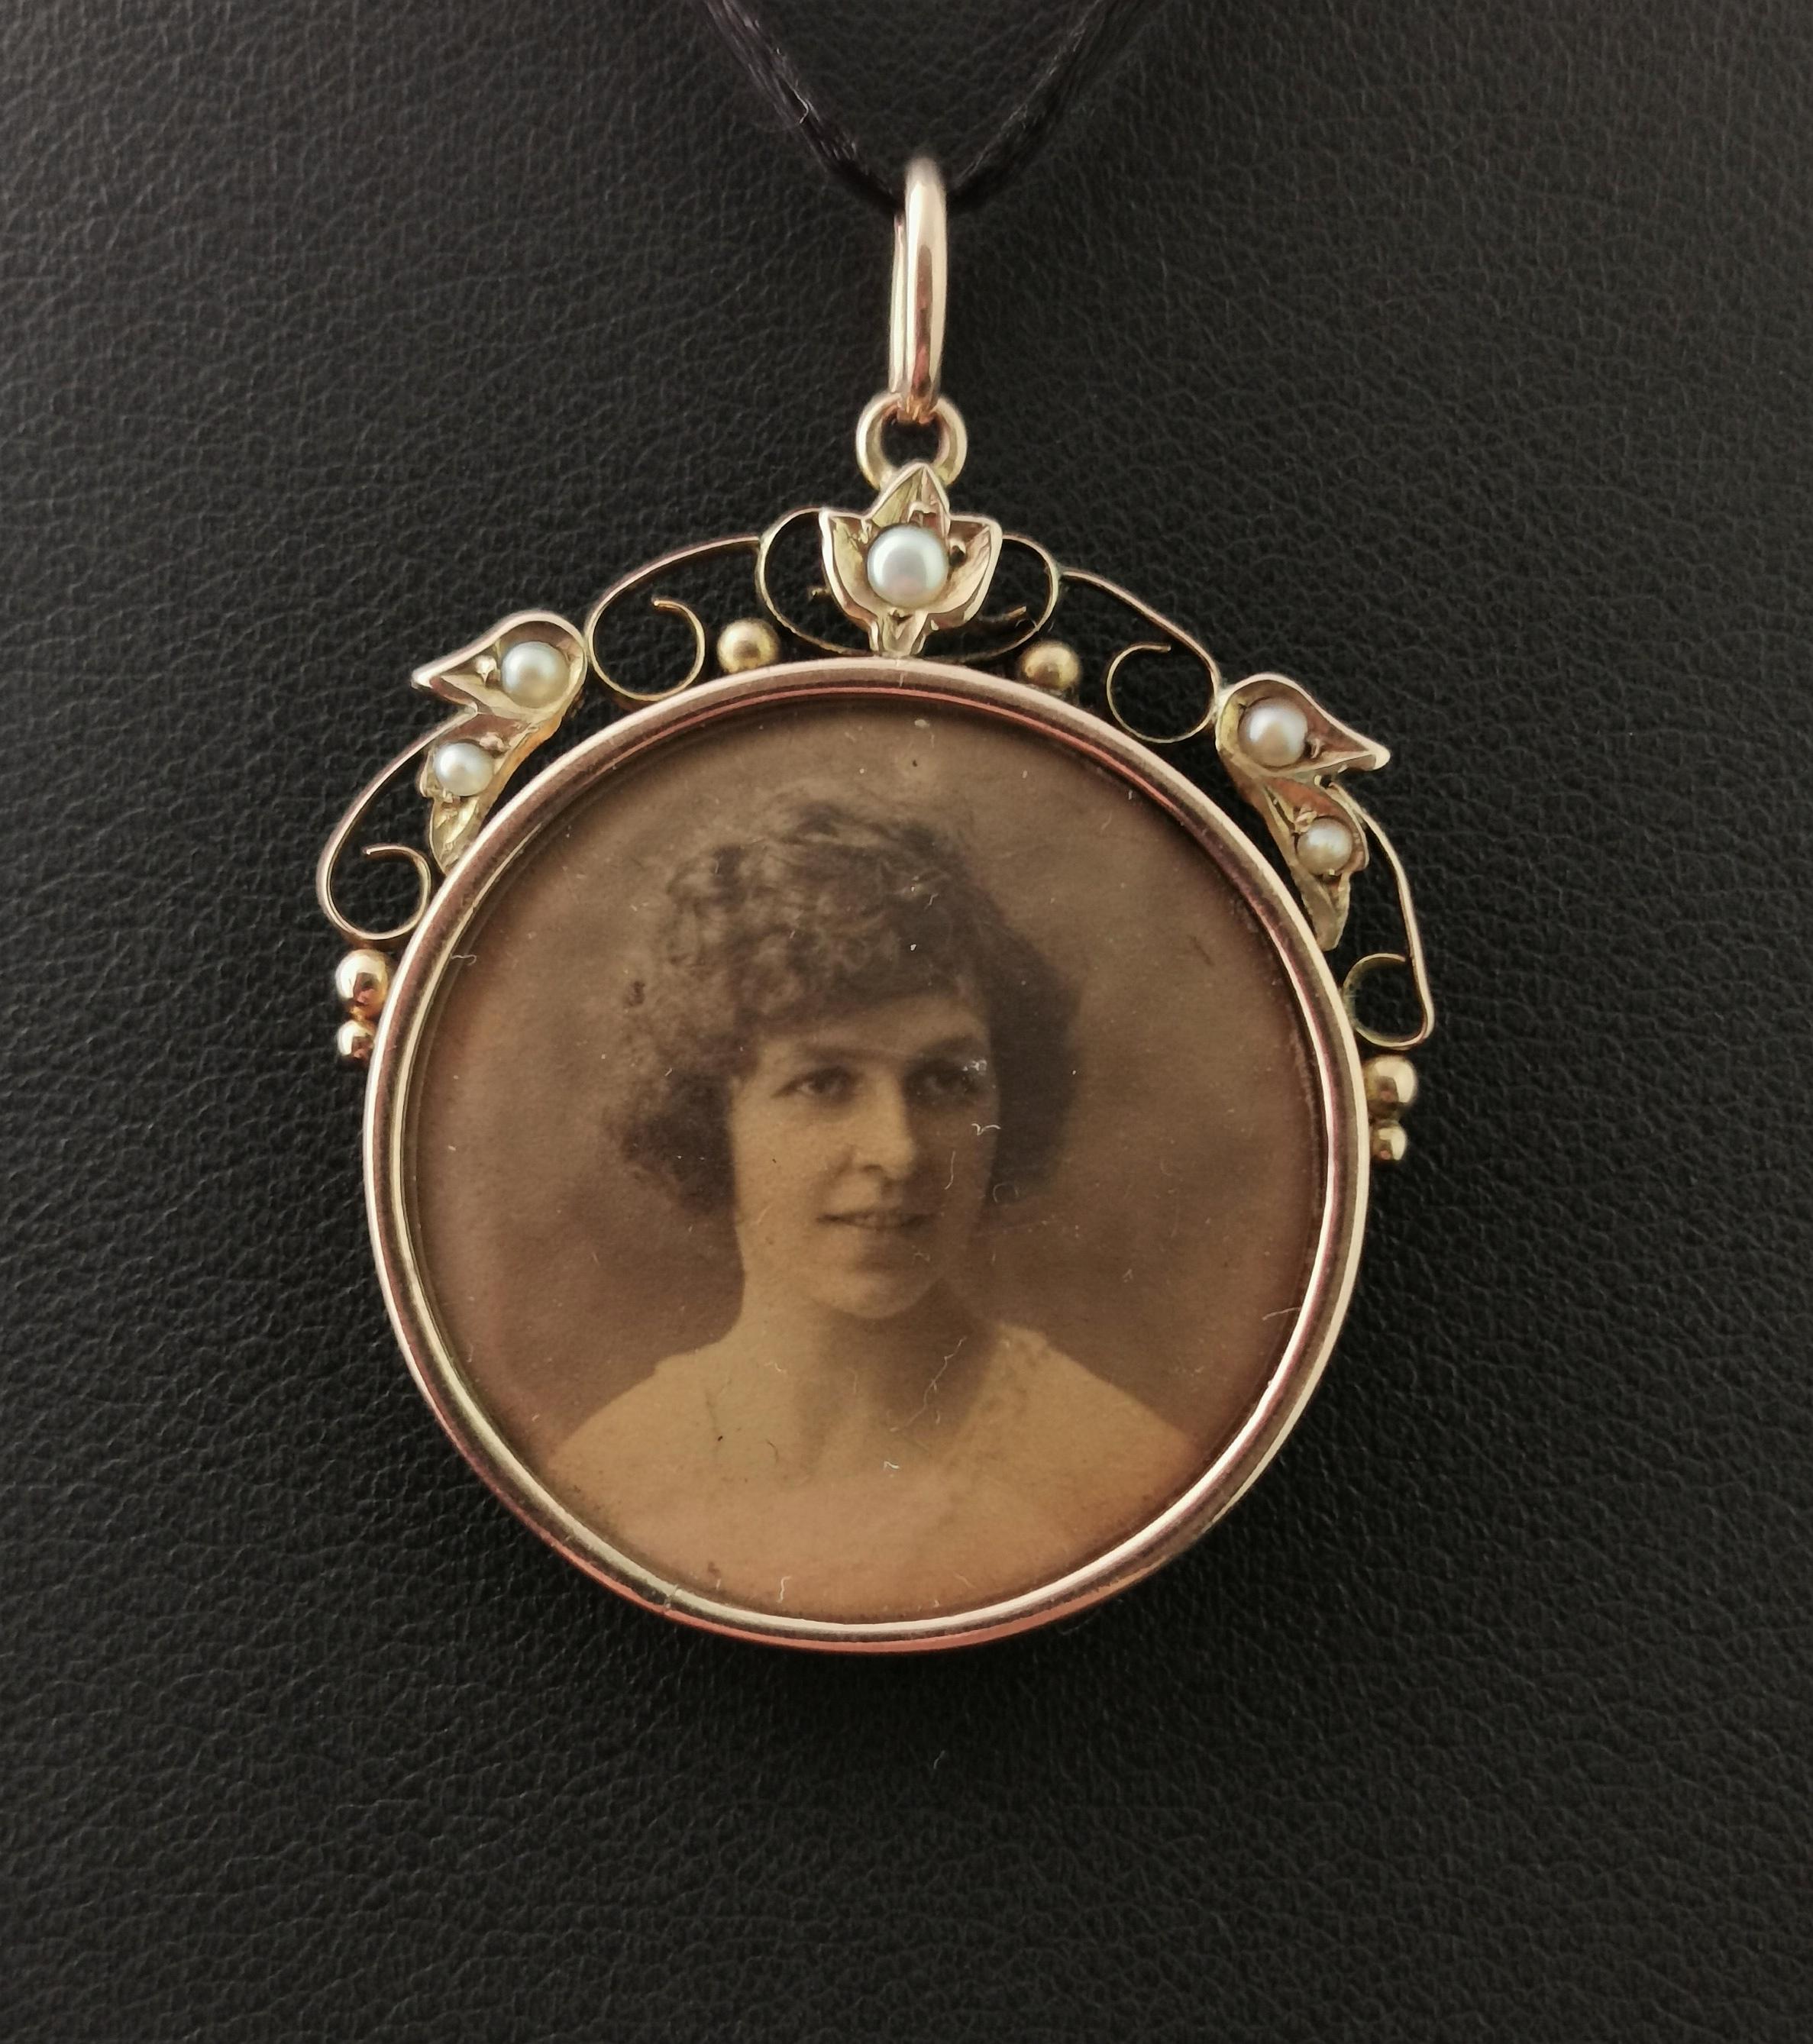 A gorgeous antique 9 karat gold portrait pendant or locket.

It has a 9 karat yellow gold frame with a pretty stylised top with scrolling gold work and leaves and flower, set with tiny creamy seed pearls.

There are two clear glass panels, it